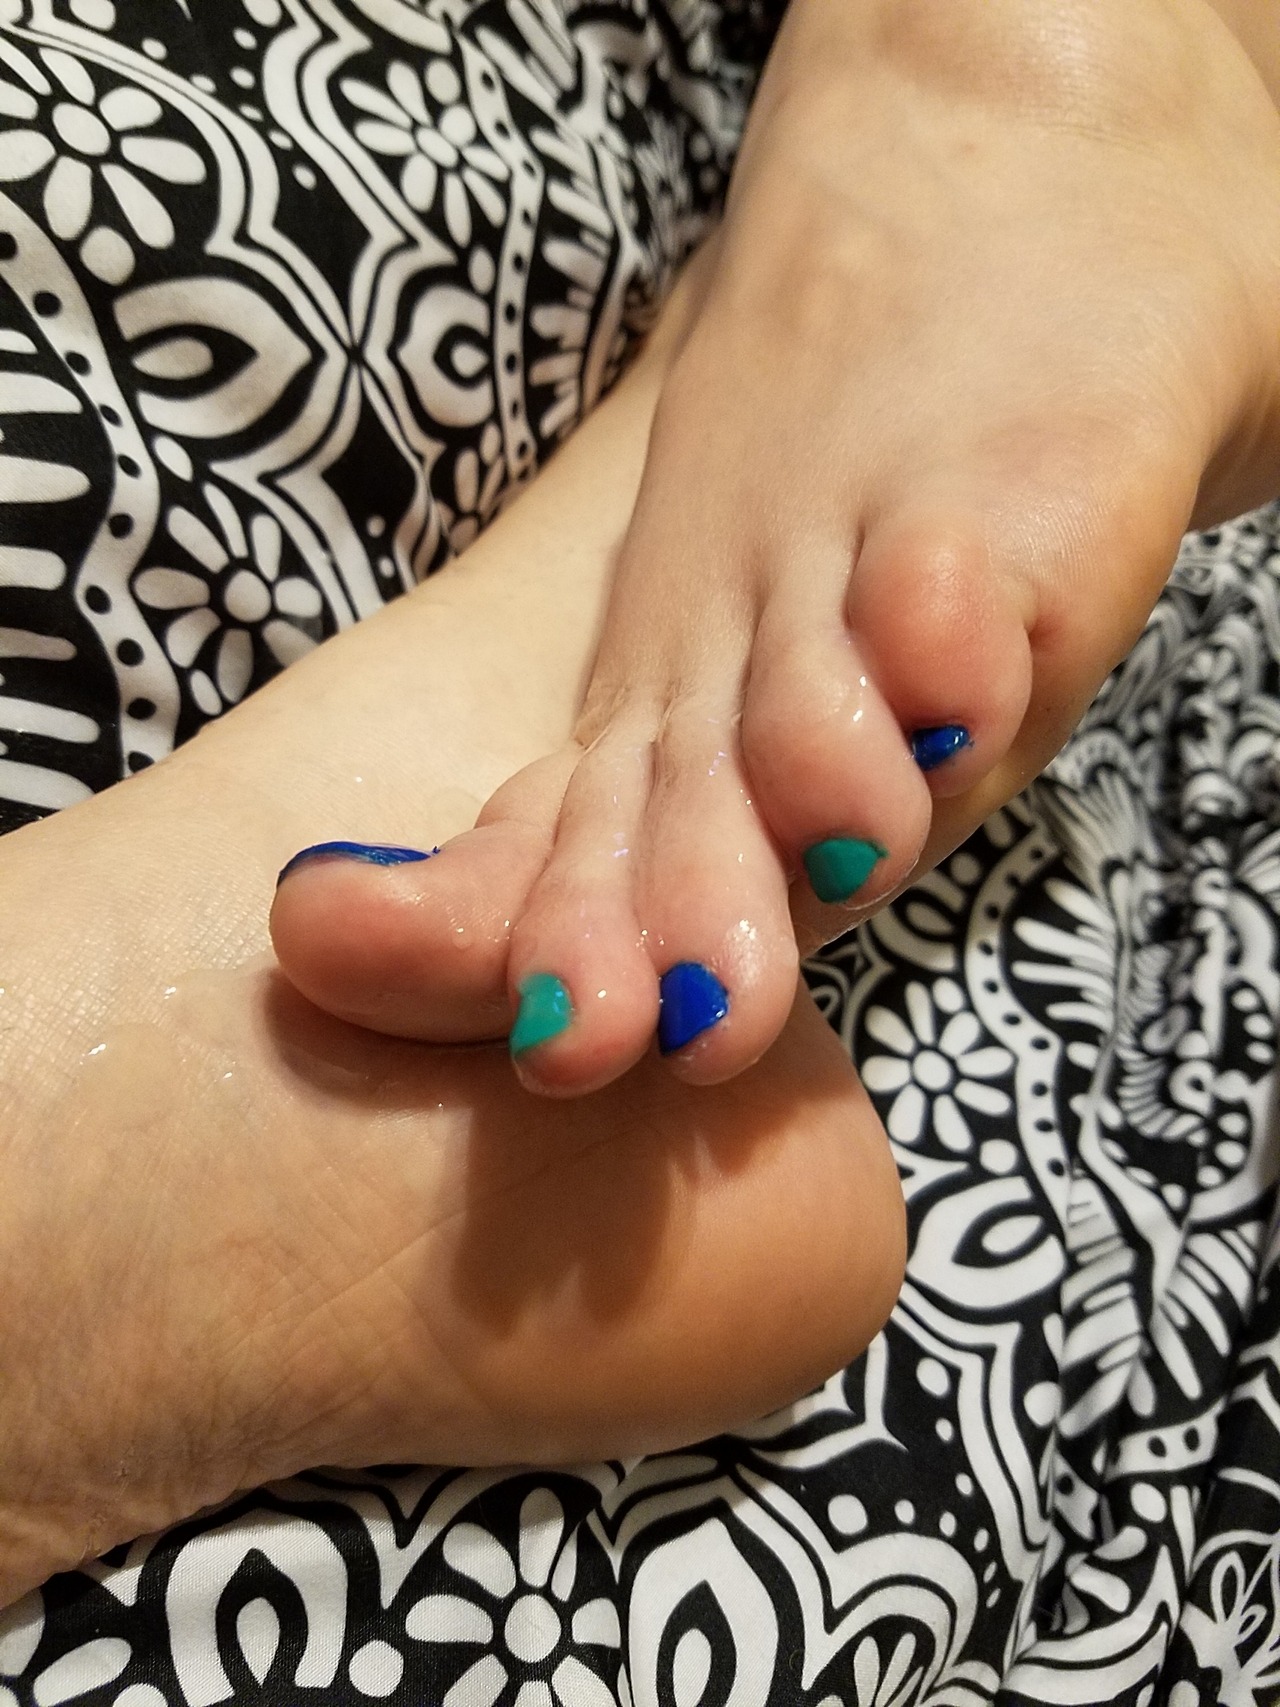 Cumming on her toes